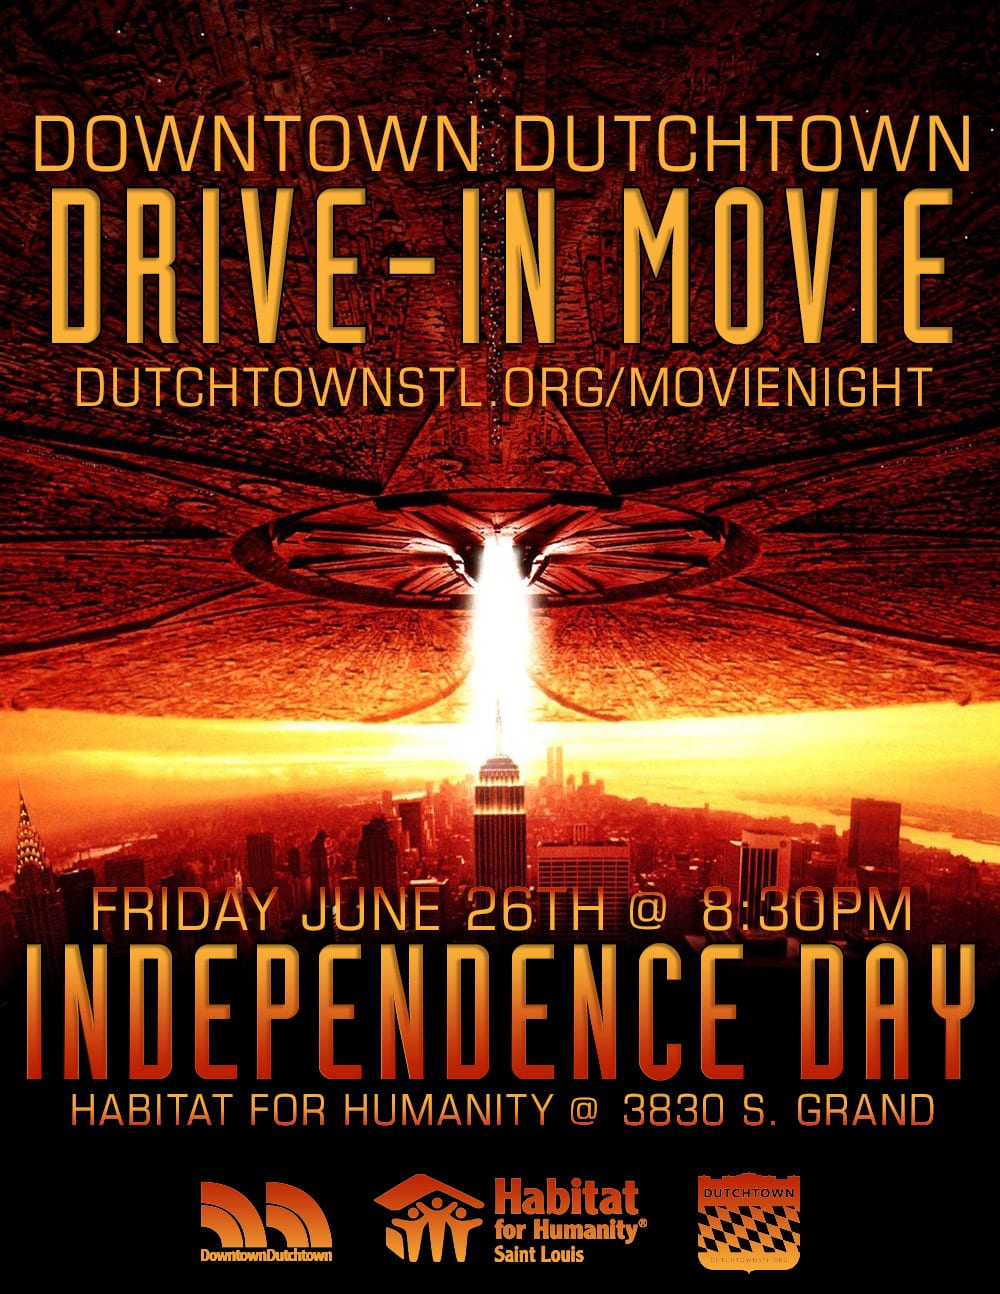 Downtown Dutchtown Drive-In Movie featuring Independence Day.